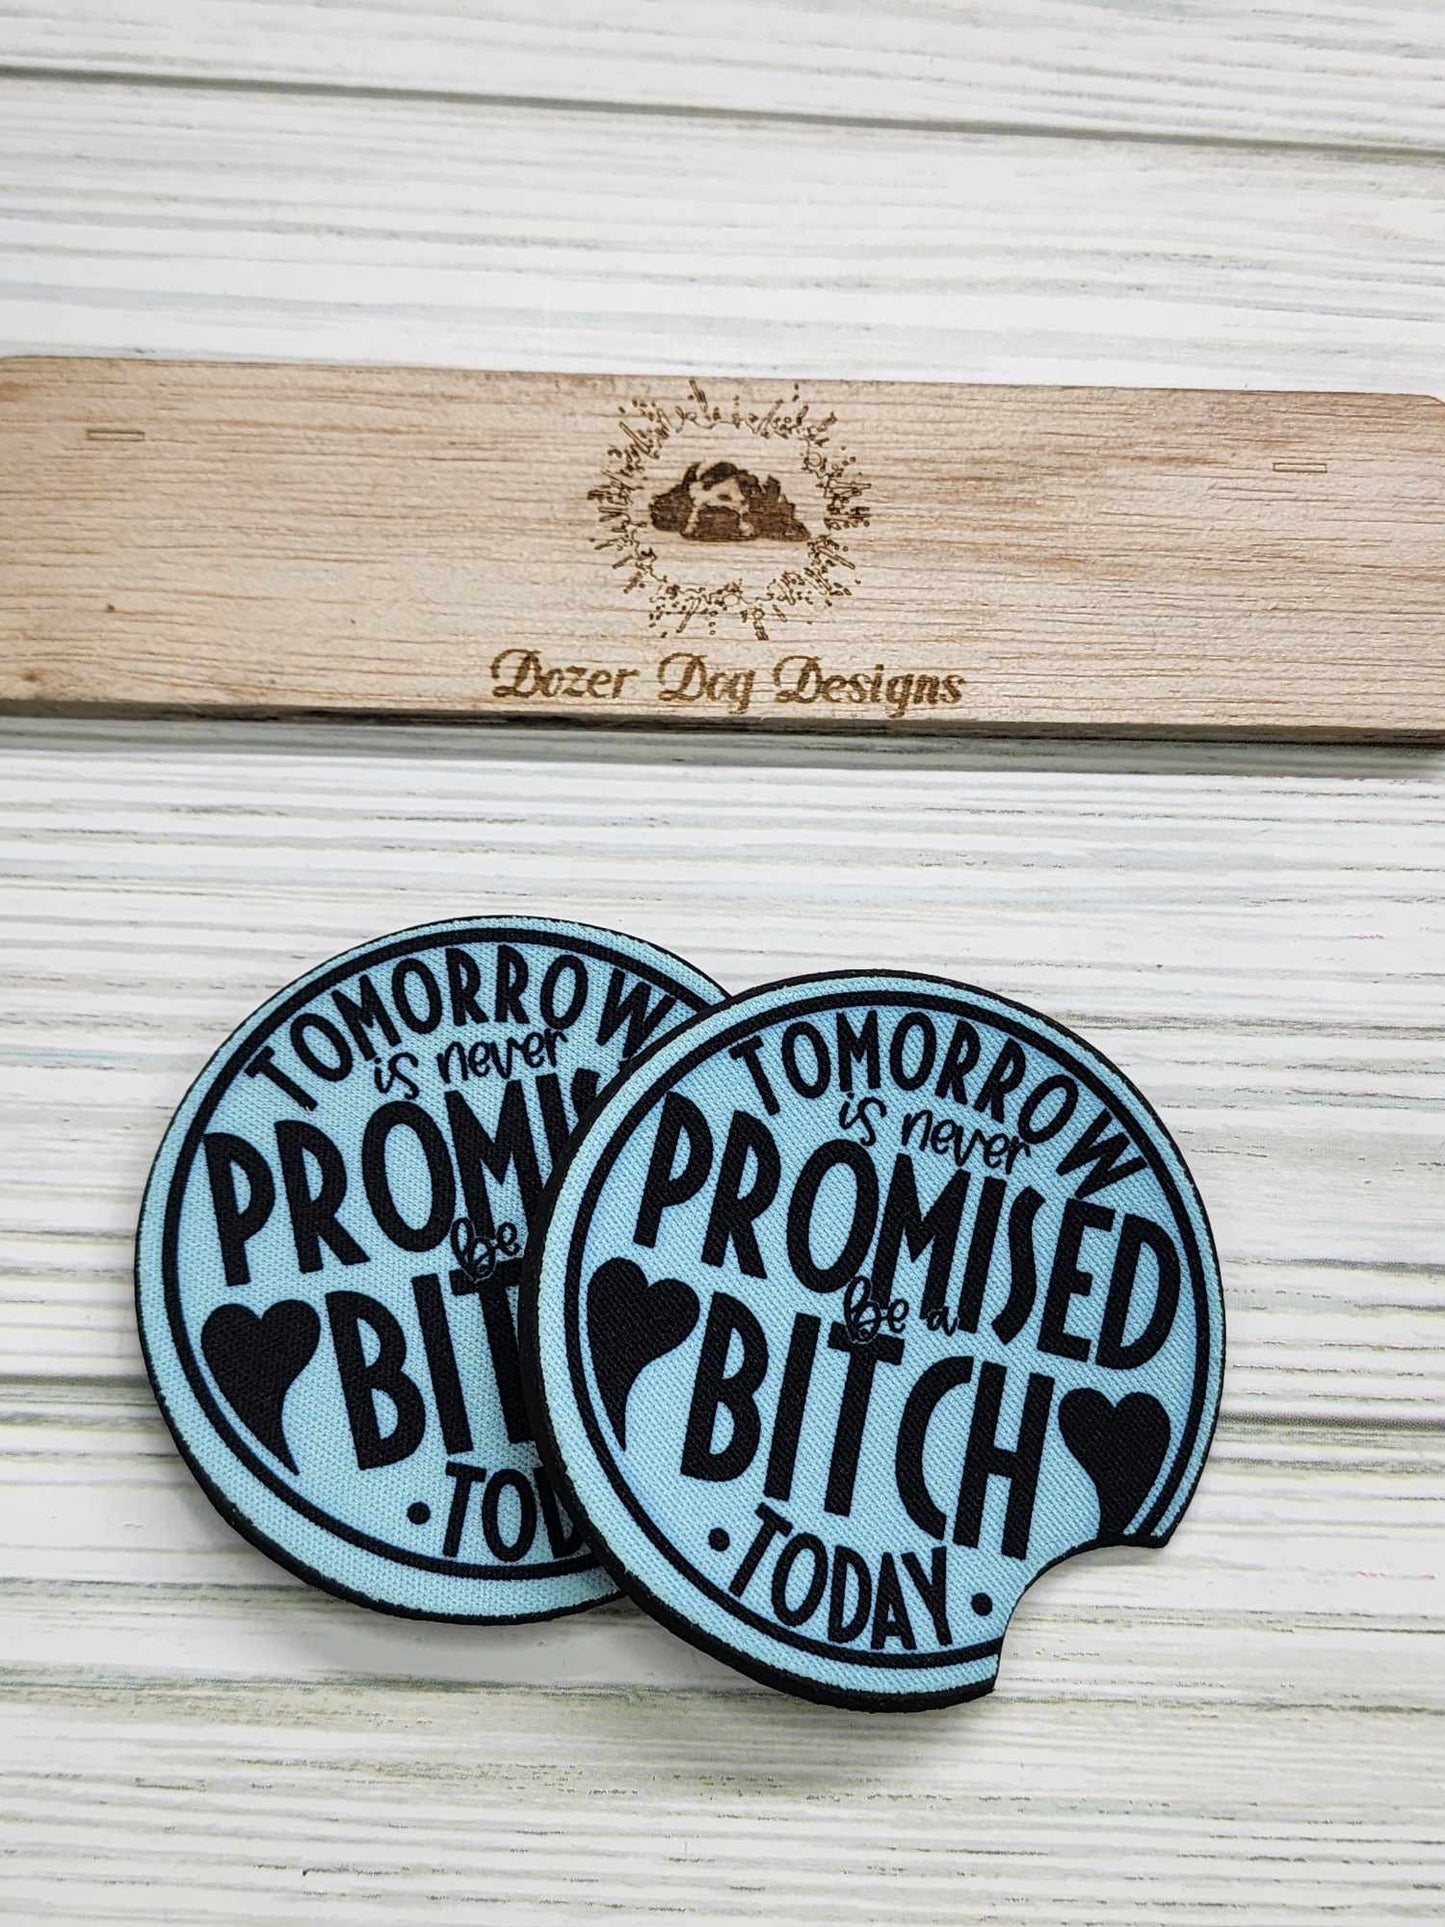 Be a B*tch Today - Text - Car Coaster Set of 2